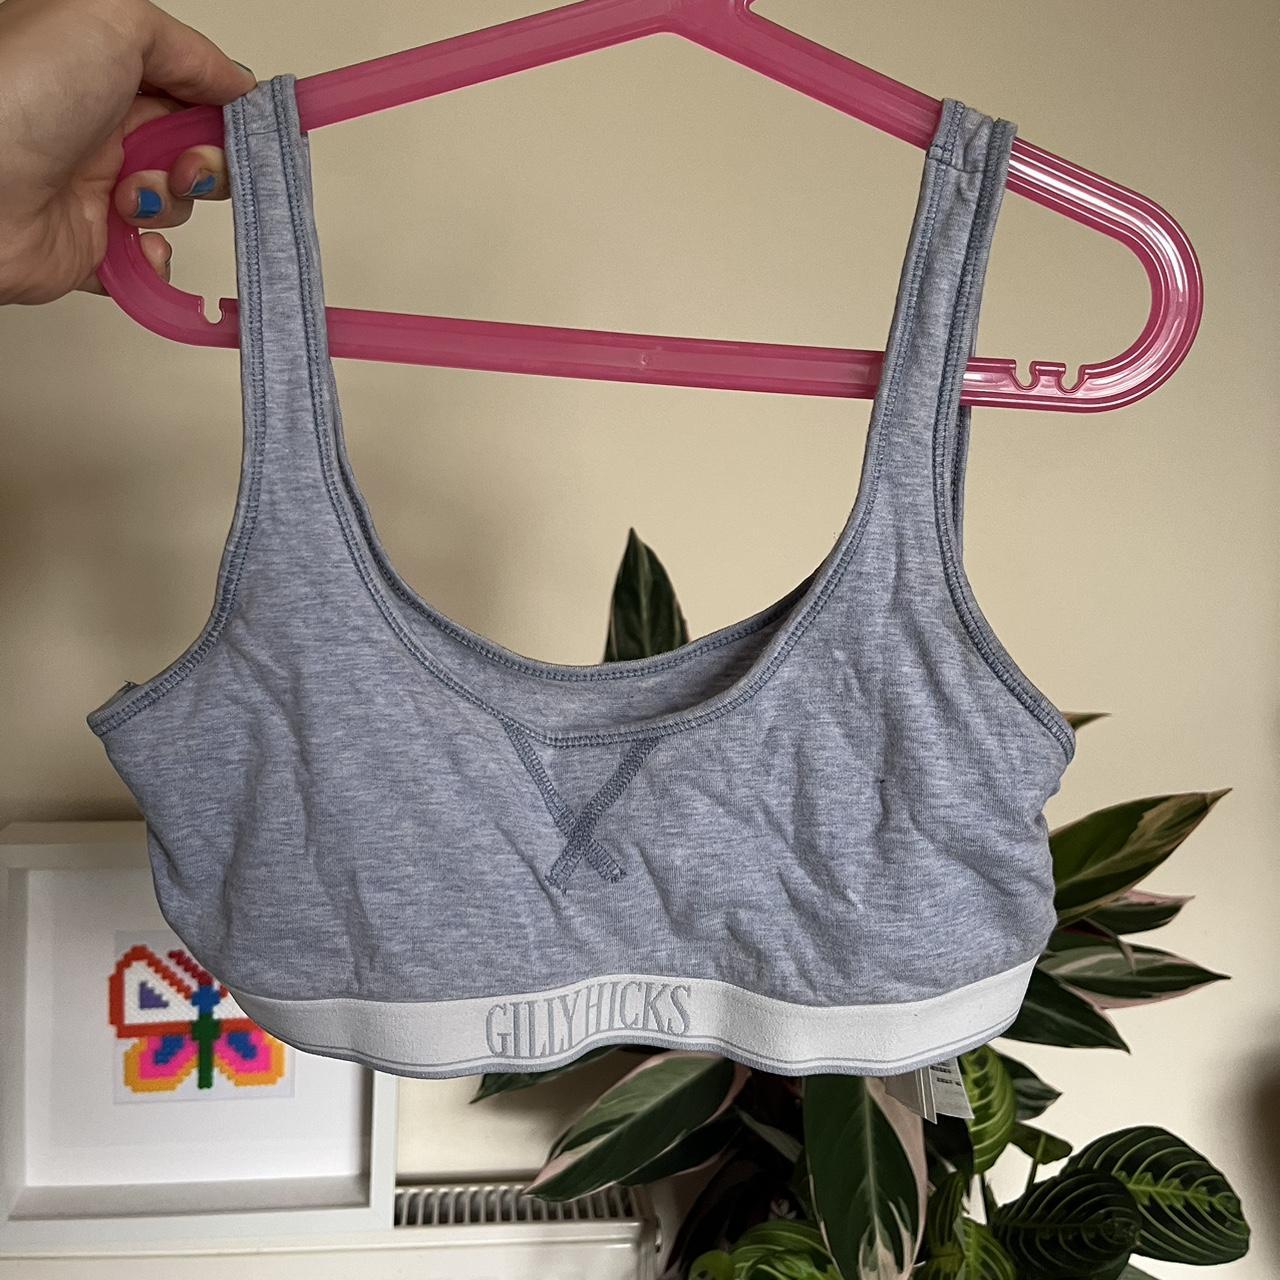 Gilly Hicks Blue soft bralette Had a while so well - Depop